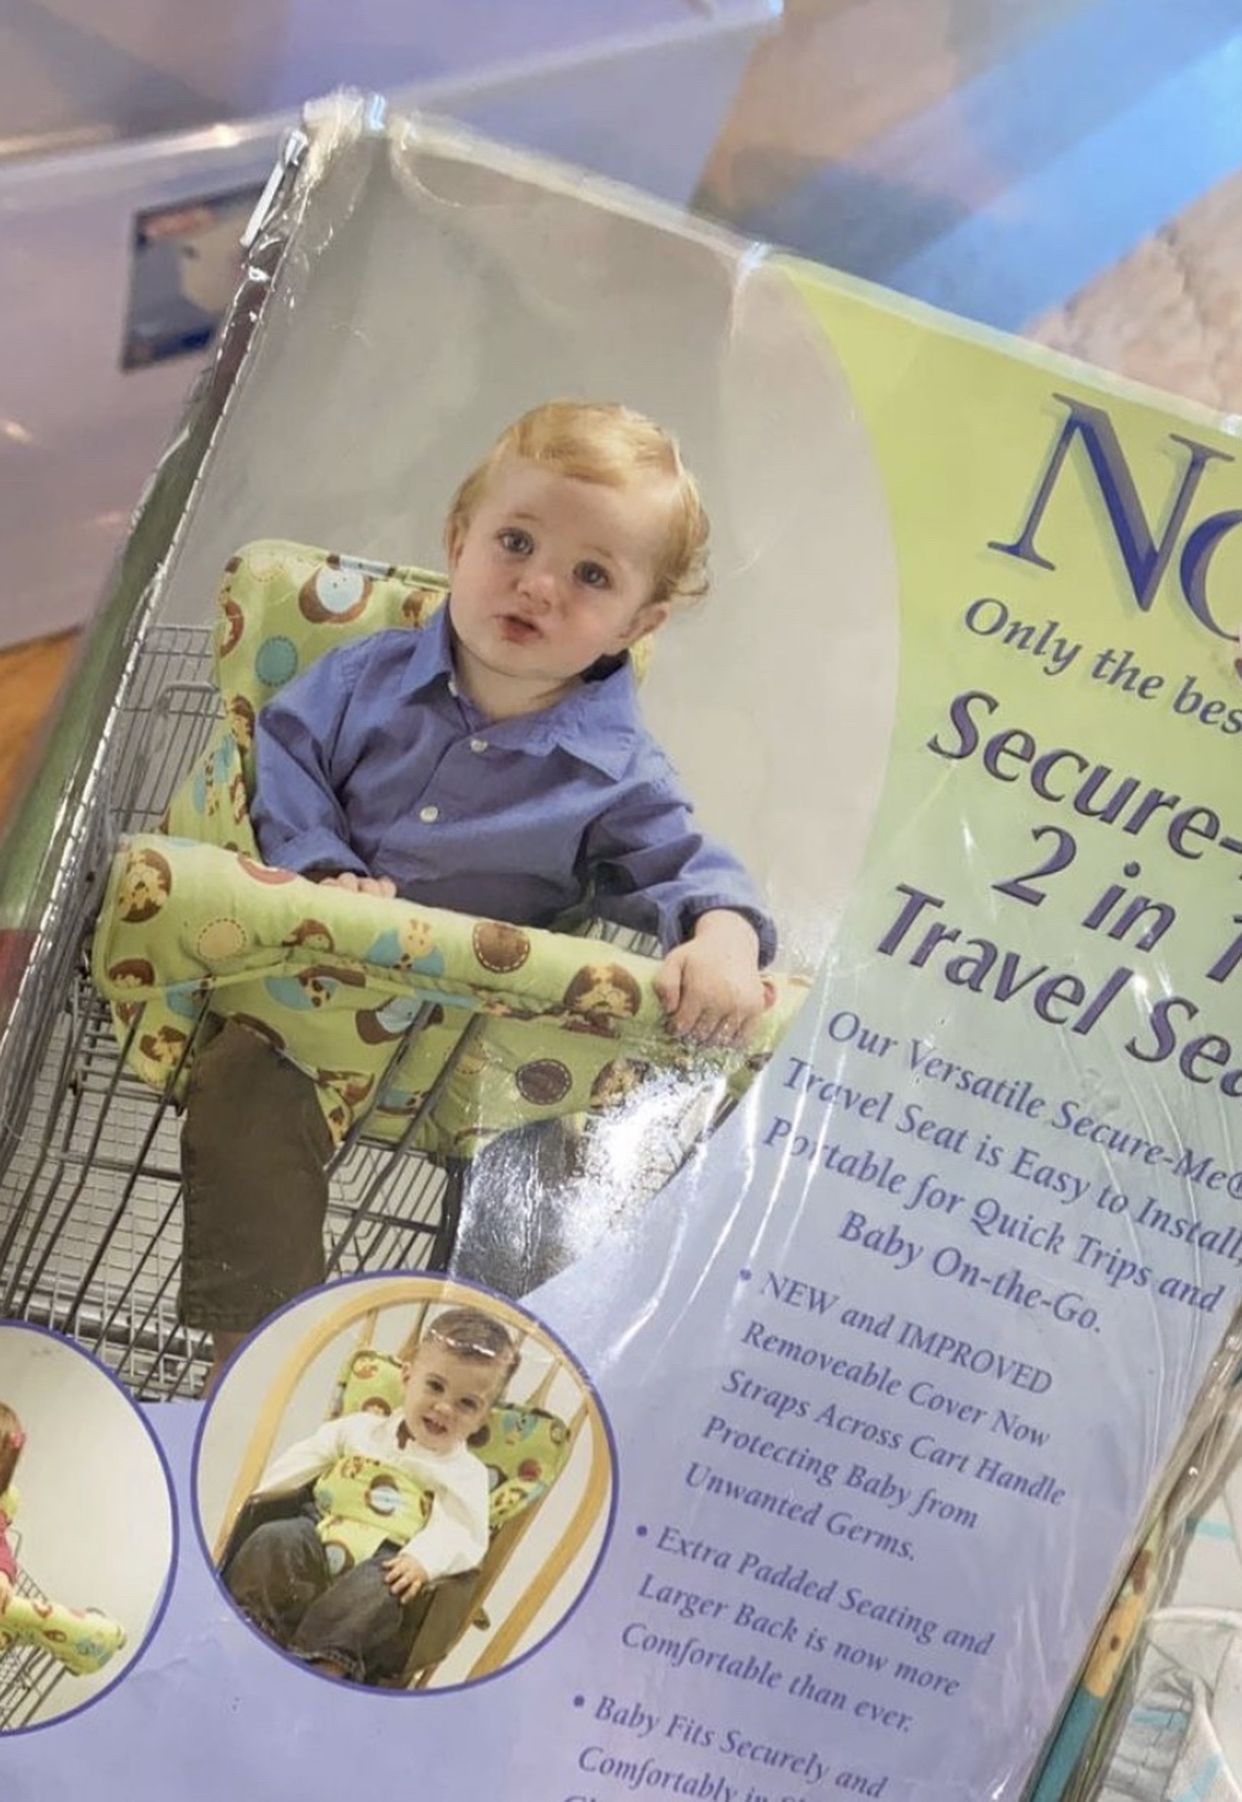 Nojo Secure-Me 2 in 1 Travel Seat